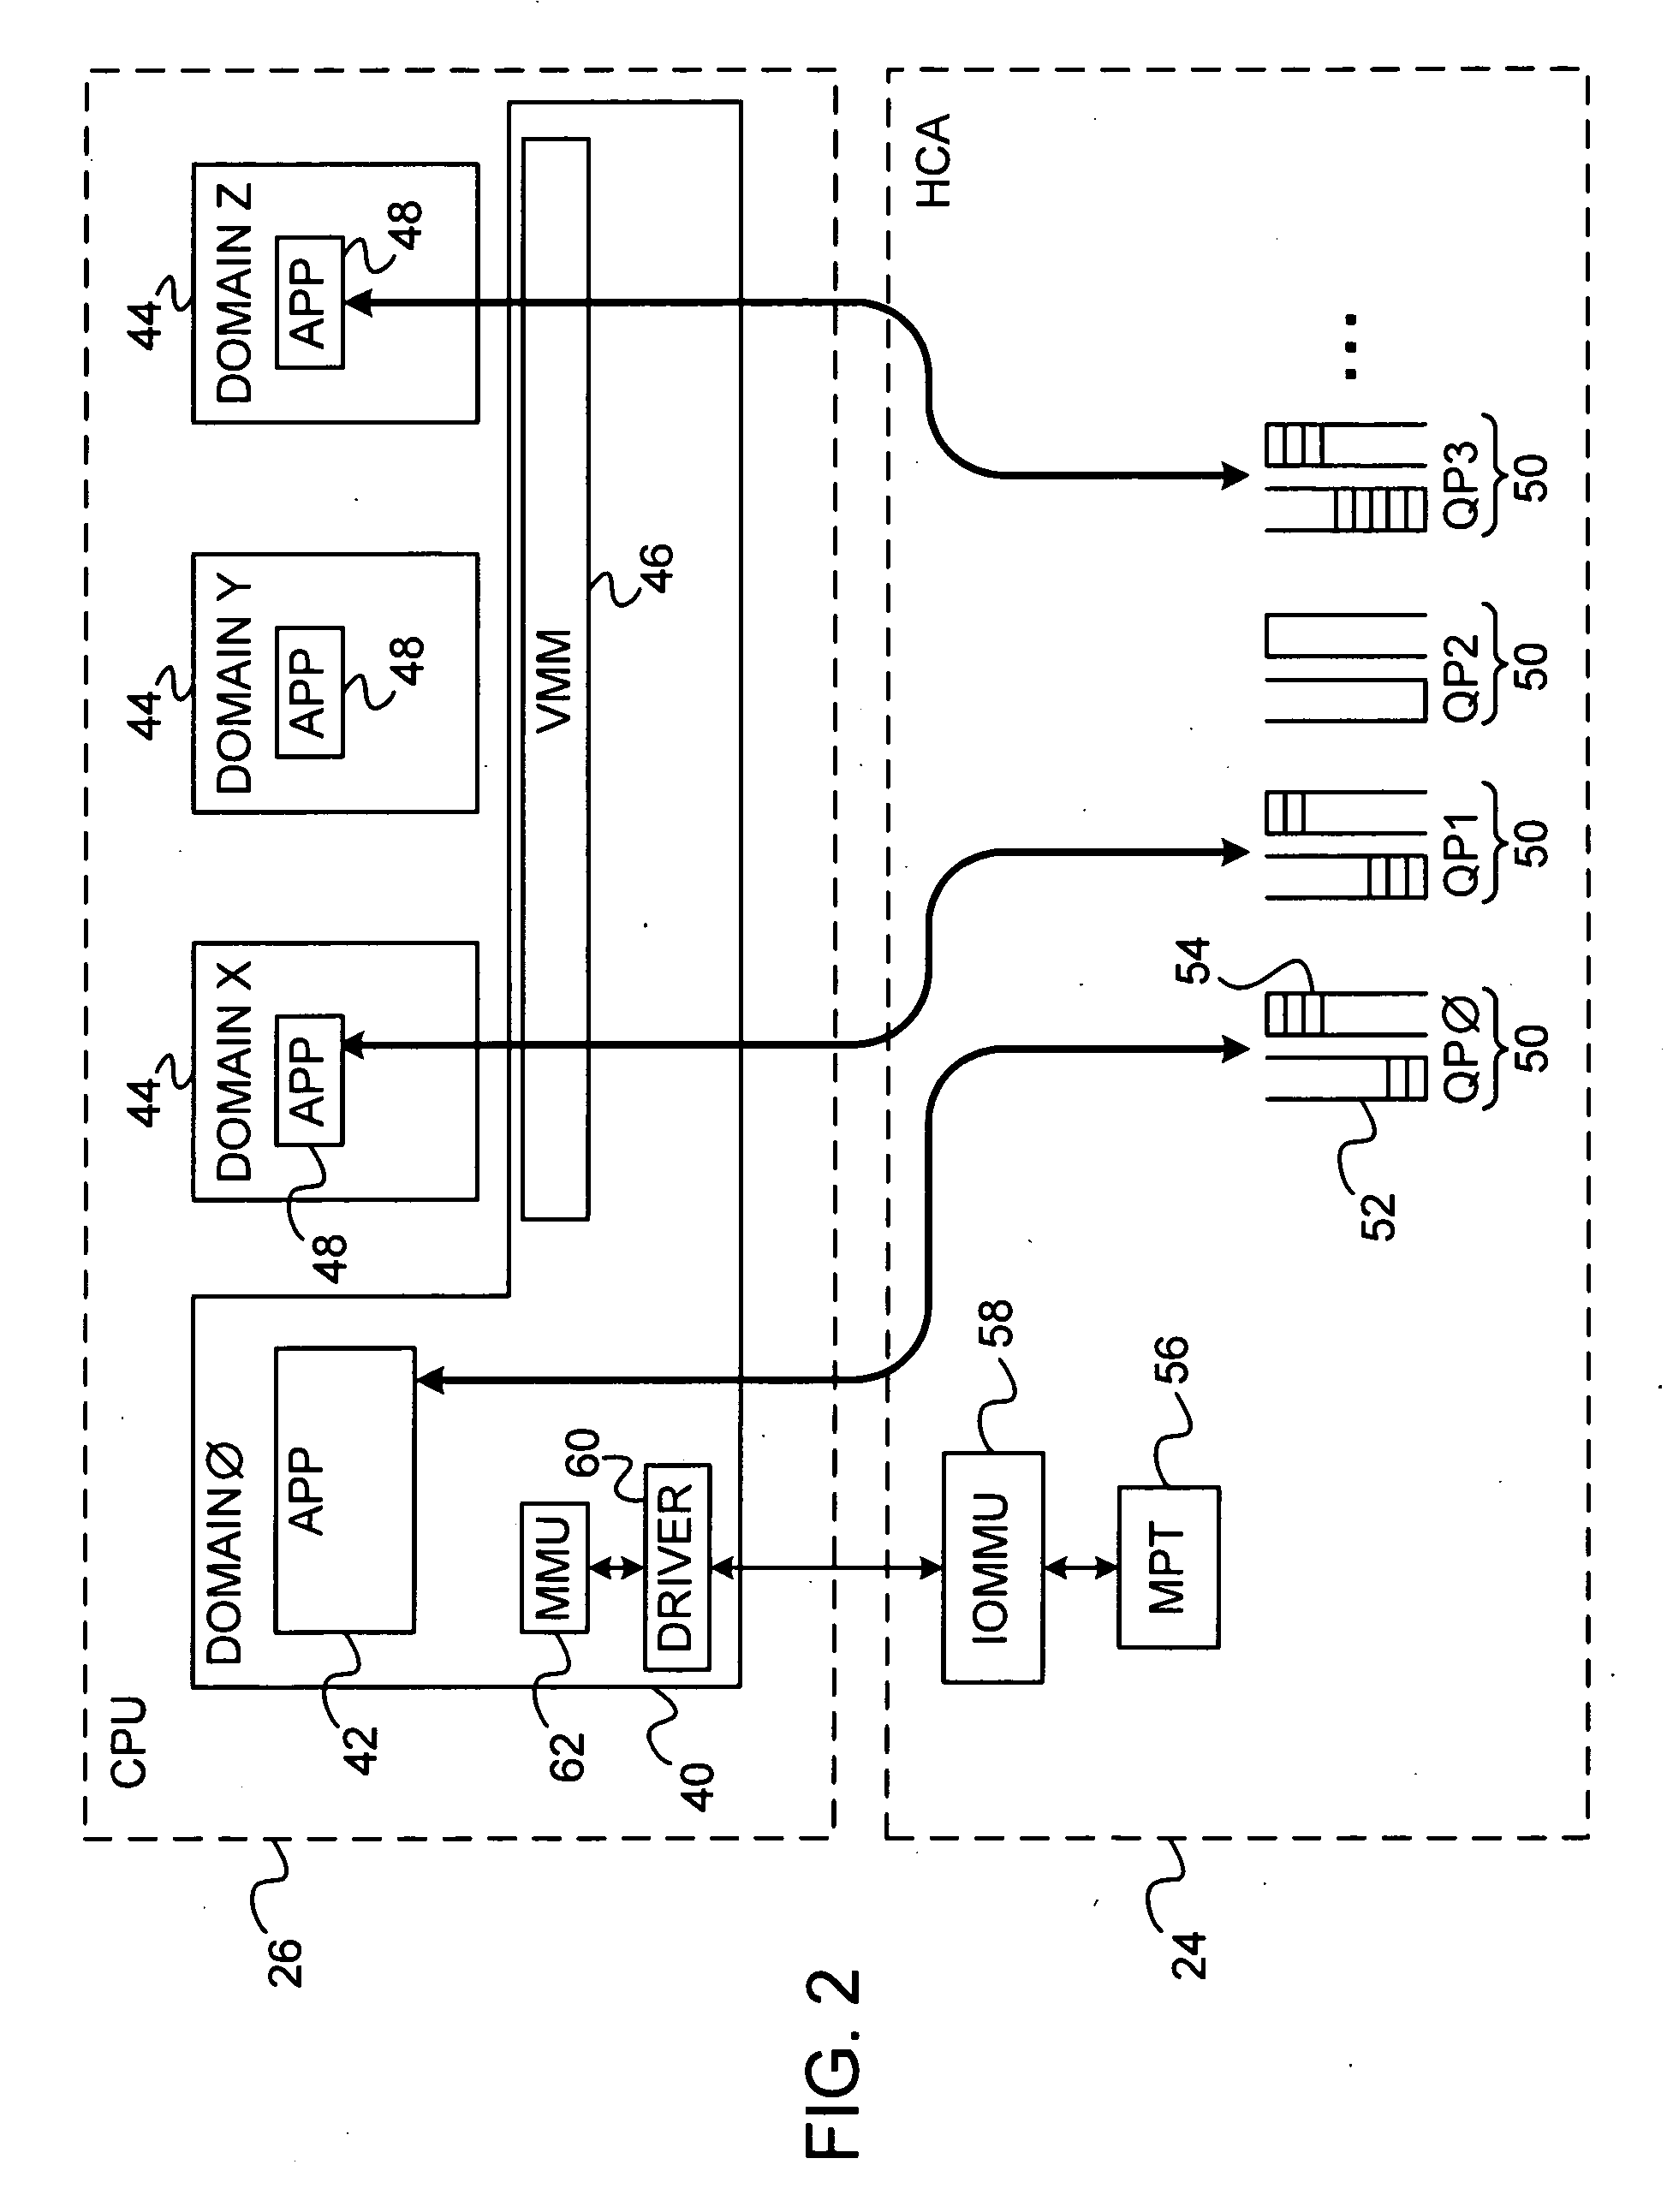 Network interface device with memory management capabilities